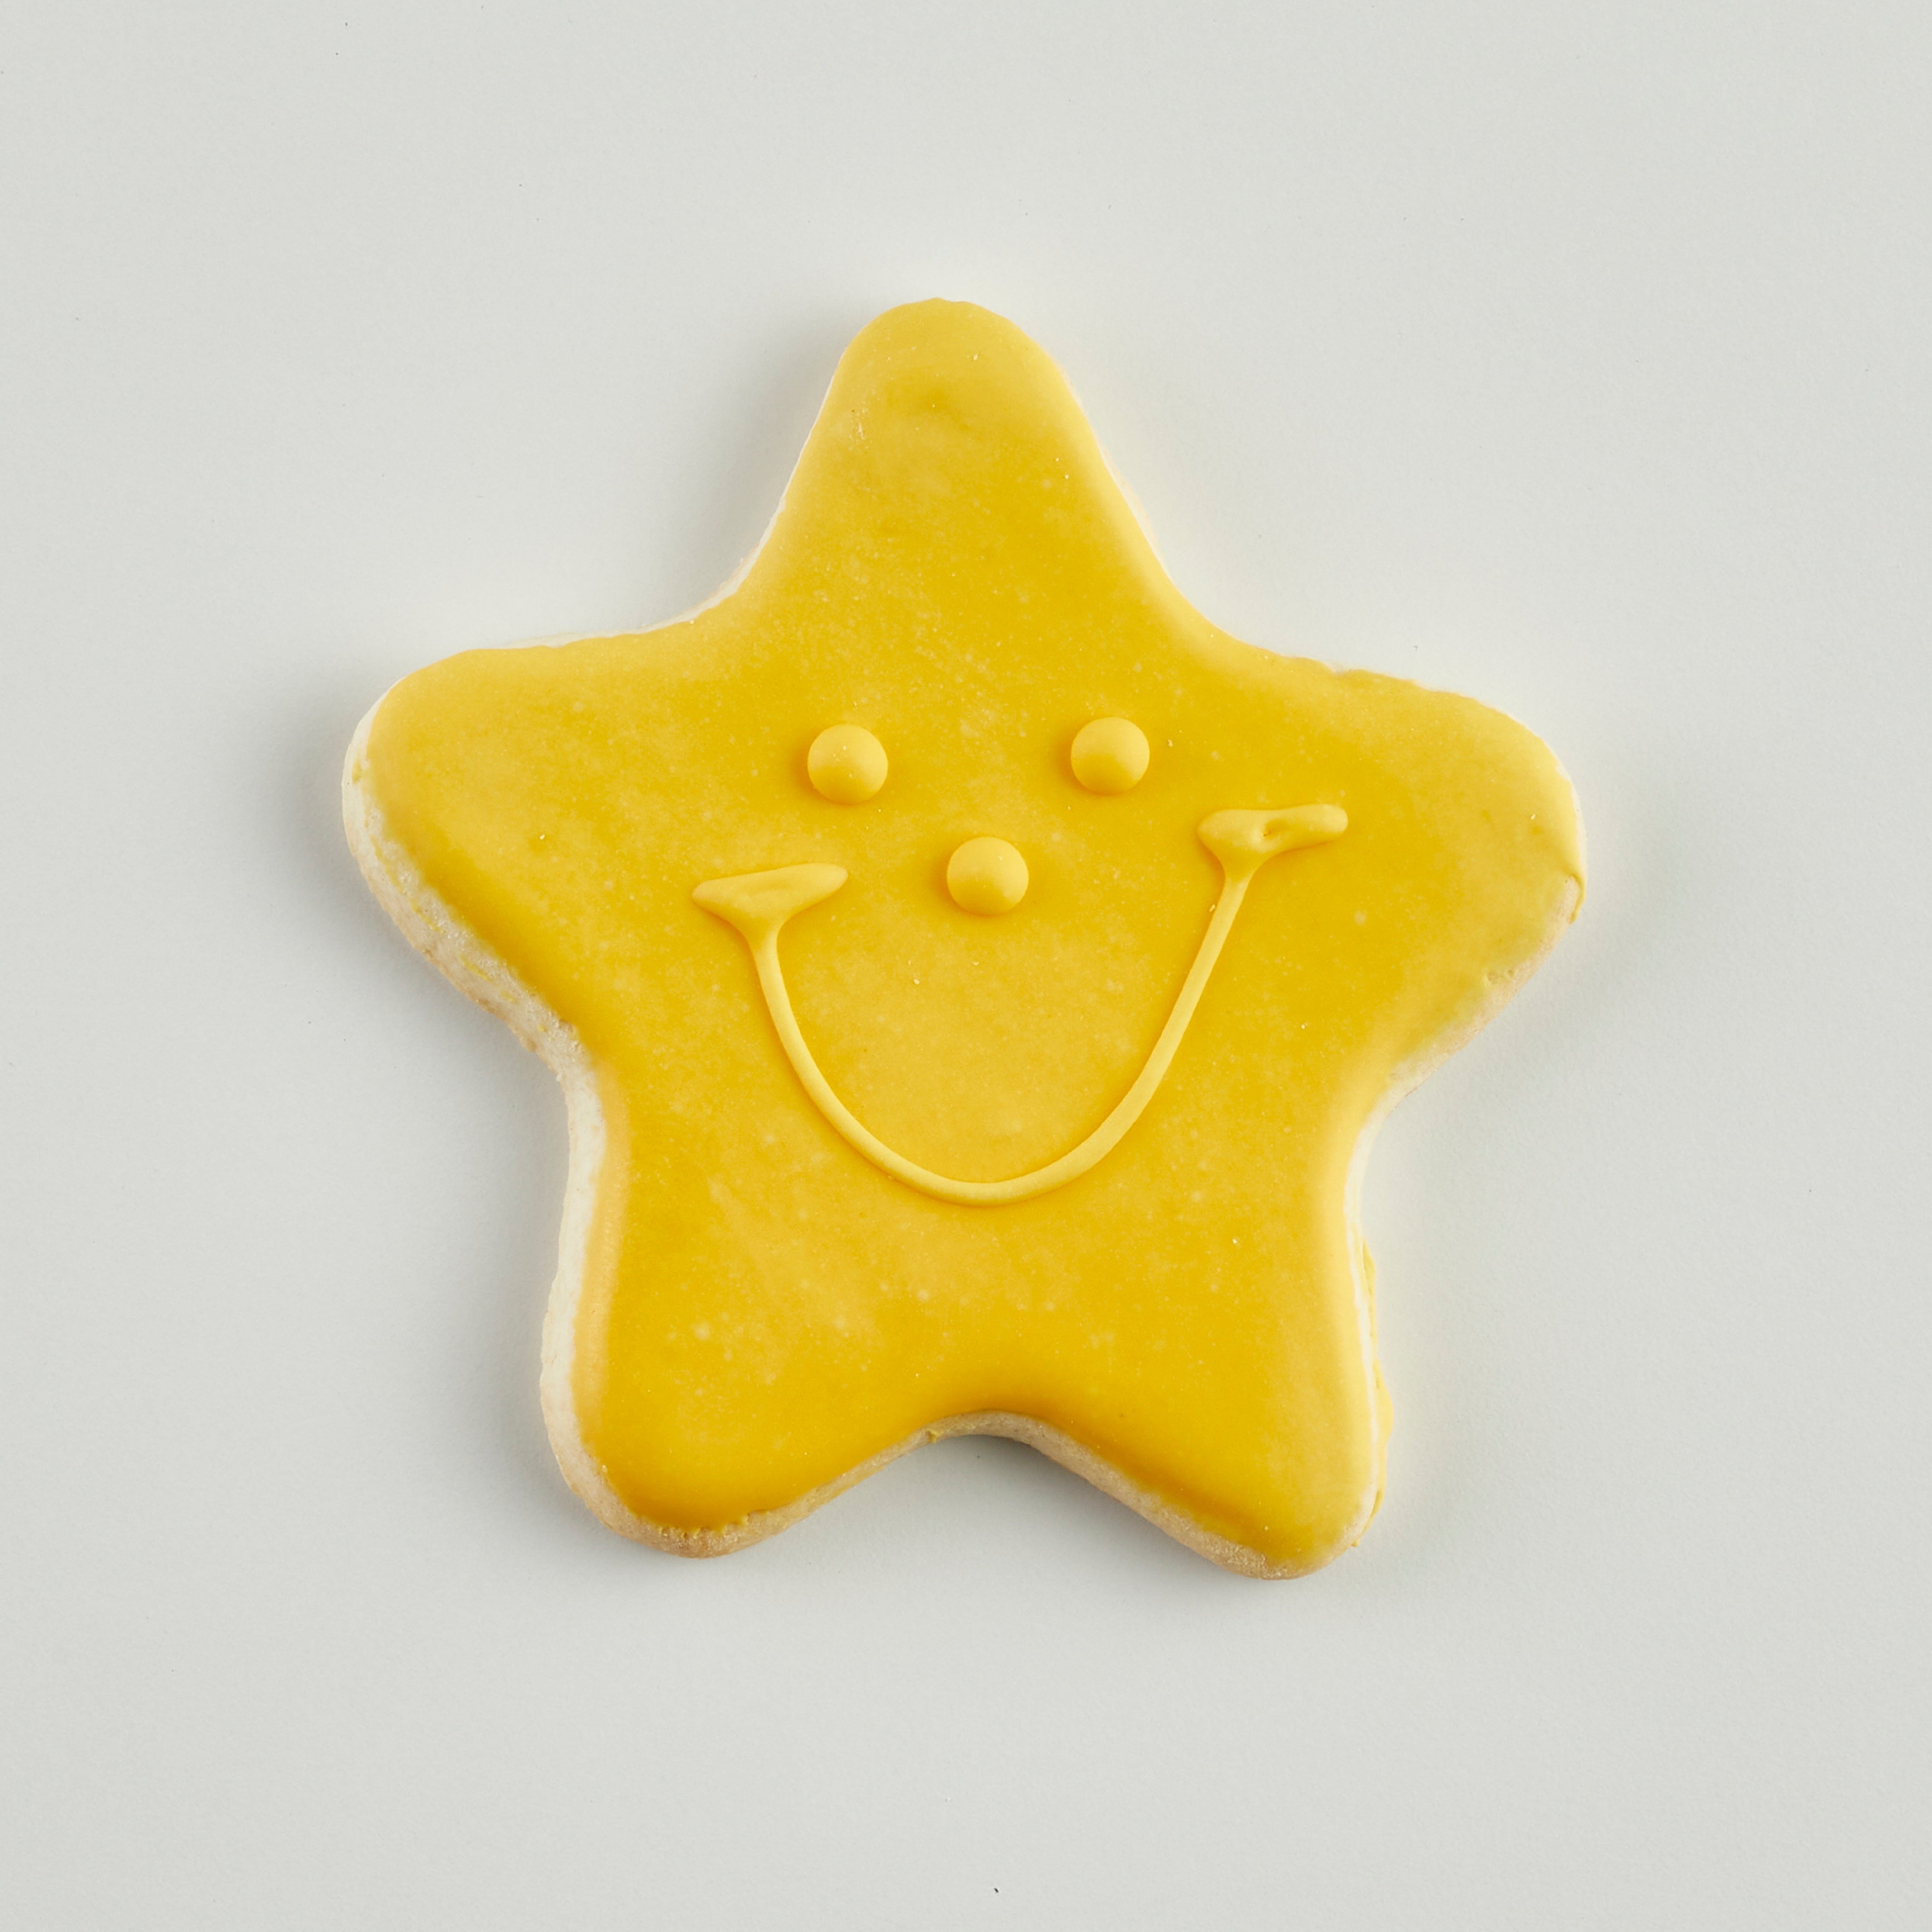 12-Pack White Iced Smiley Cookies - Nut Free, Kosher, Individually Wrapped  Sugar Cookies